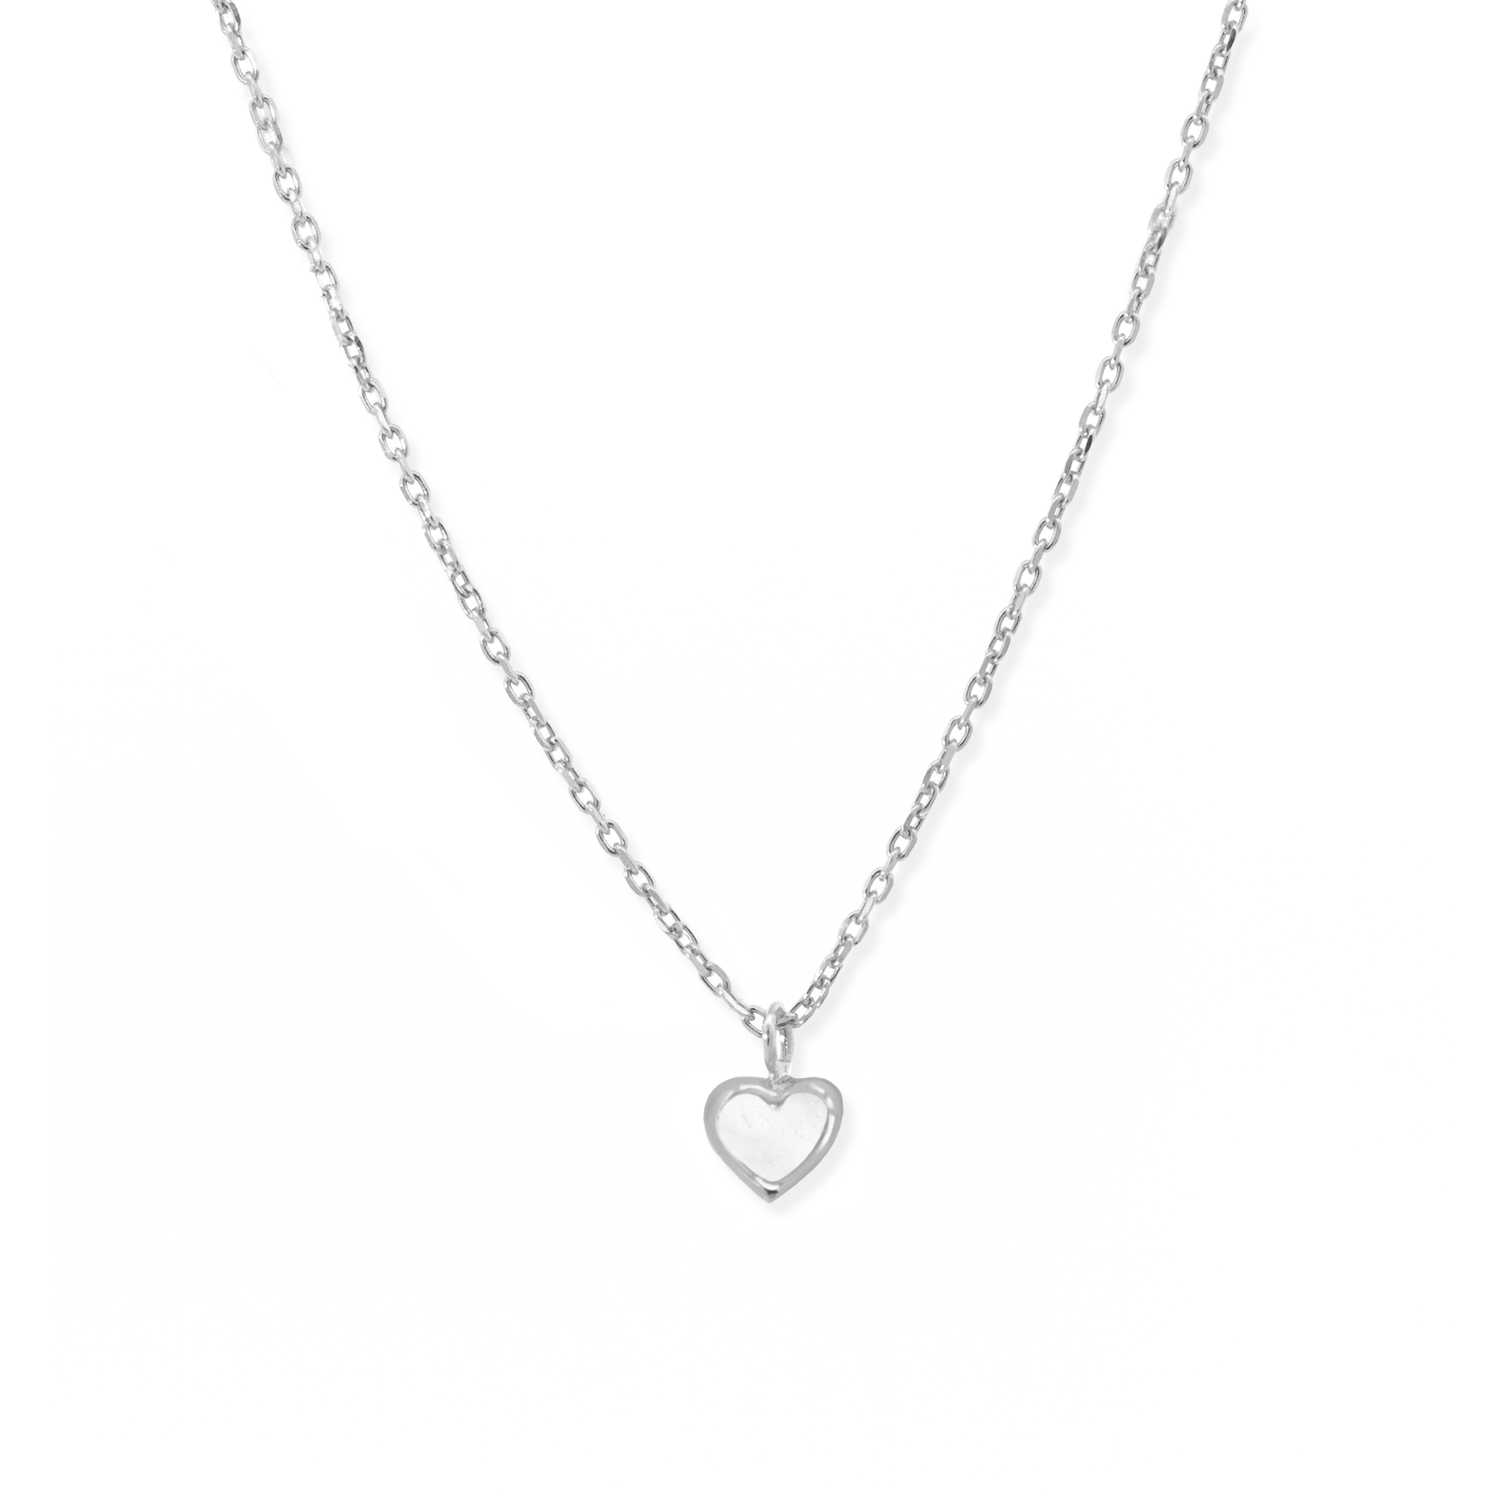 Charming and elegant necklace in 925 silver with moonstone pendant.